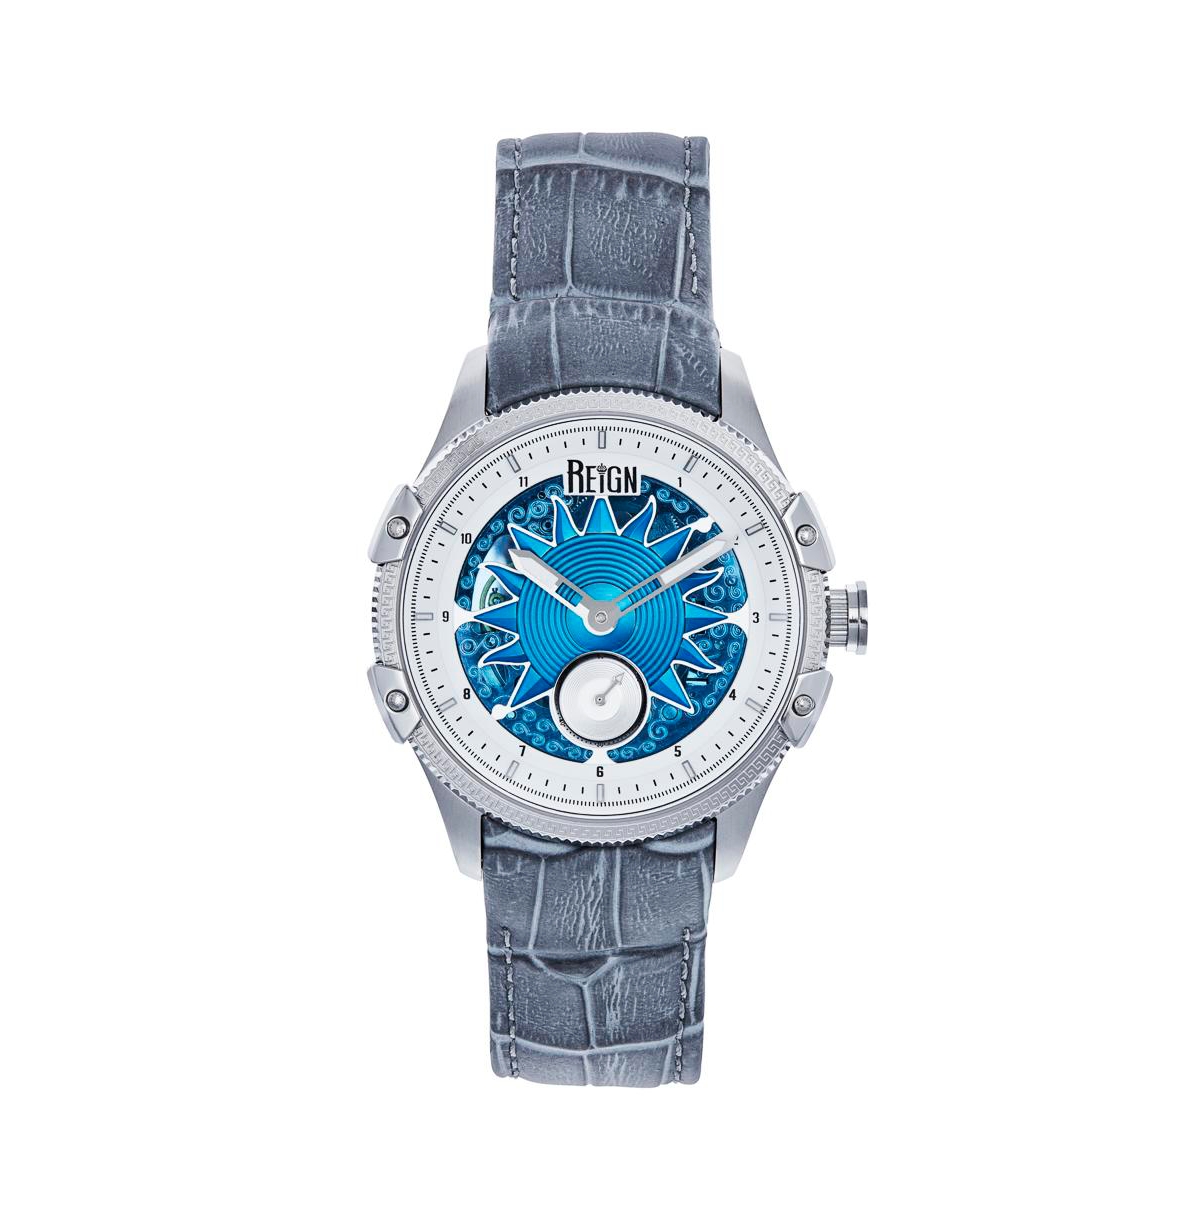 Men Solstice Automatic Semi-Skeleton Leather Strap Watch - Gray/Blue - Gray/blue